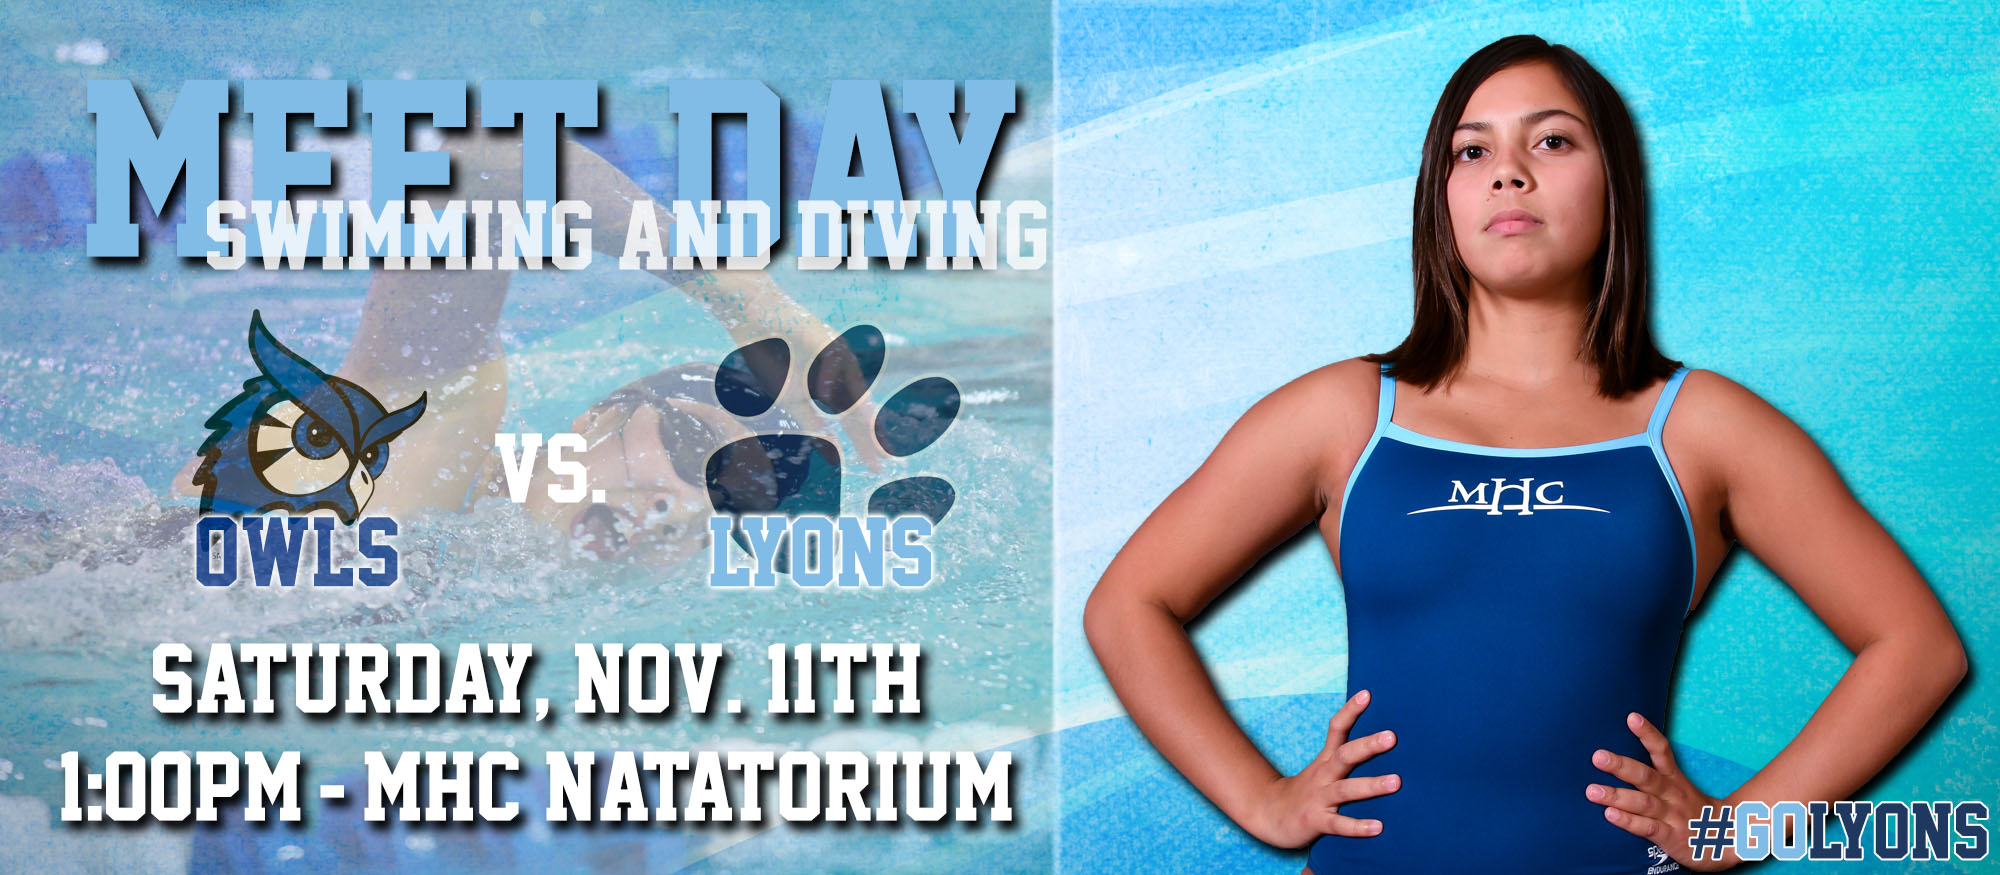 Gameday graphic promoting the Lyons swimming & diving home meet on Saturday, November 11th against Westfield State at 1pm.